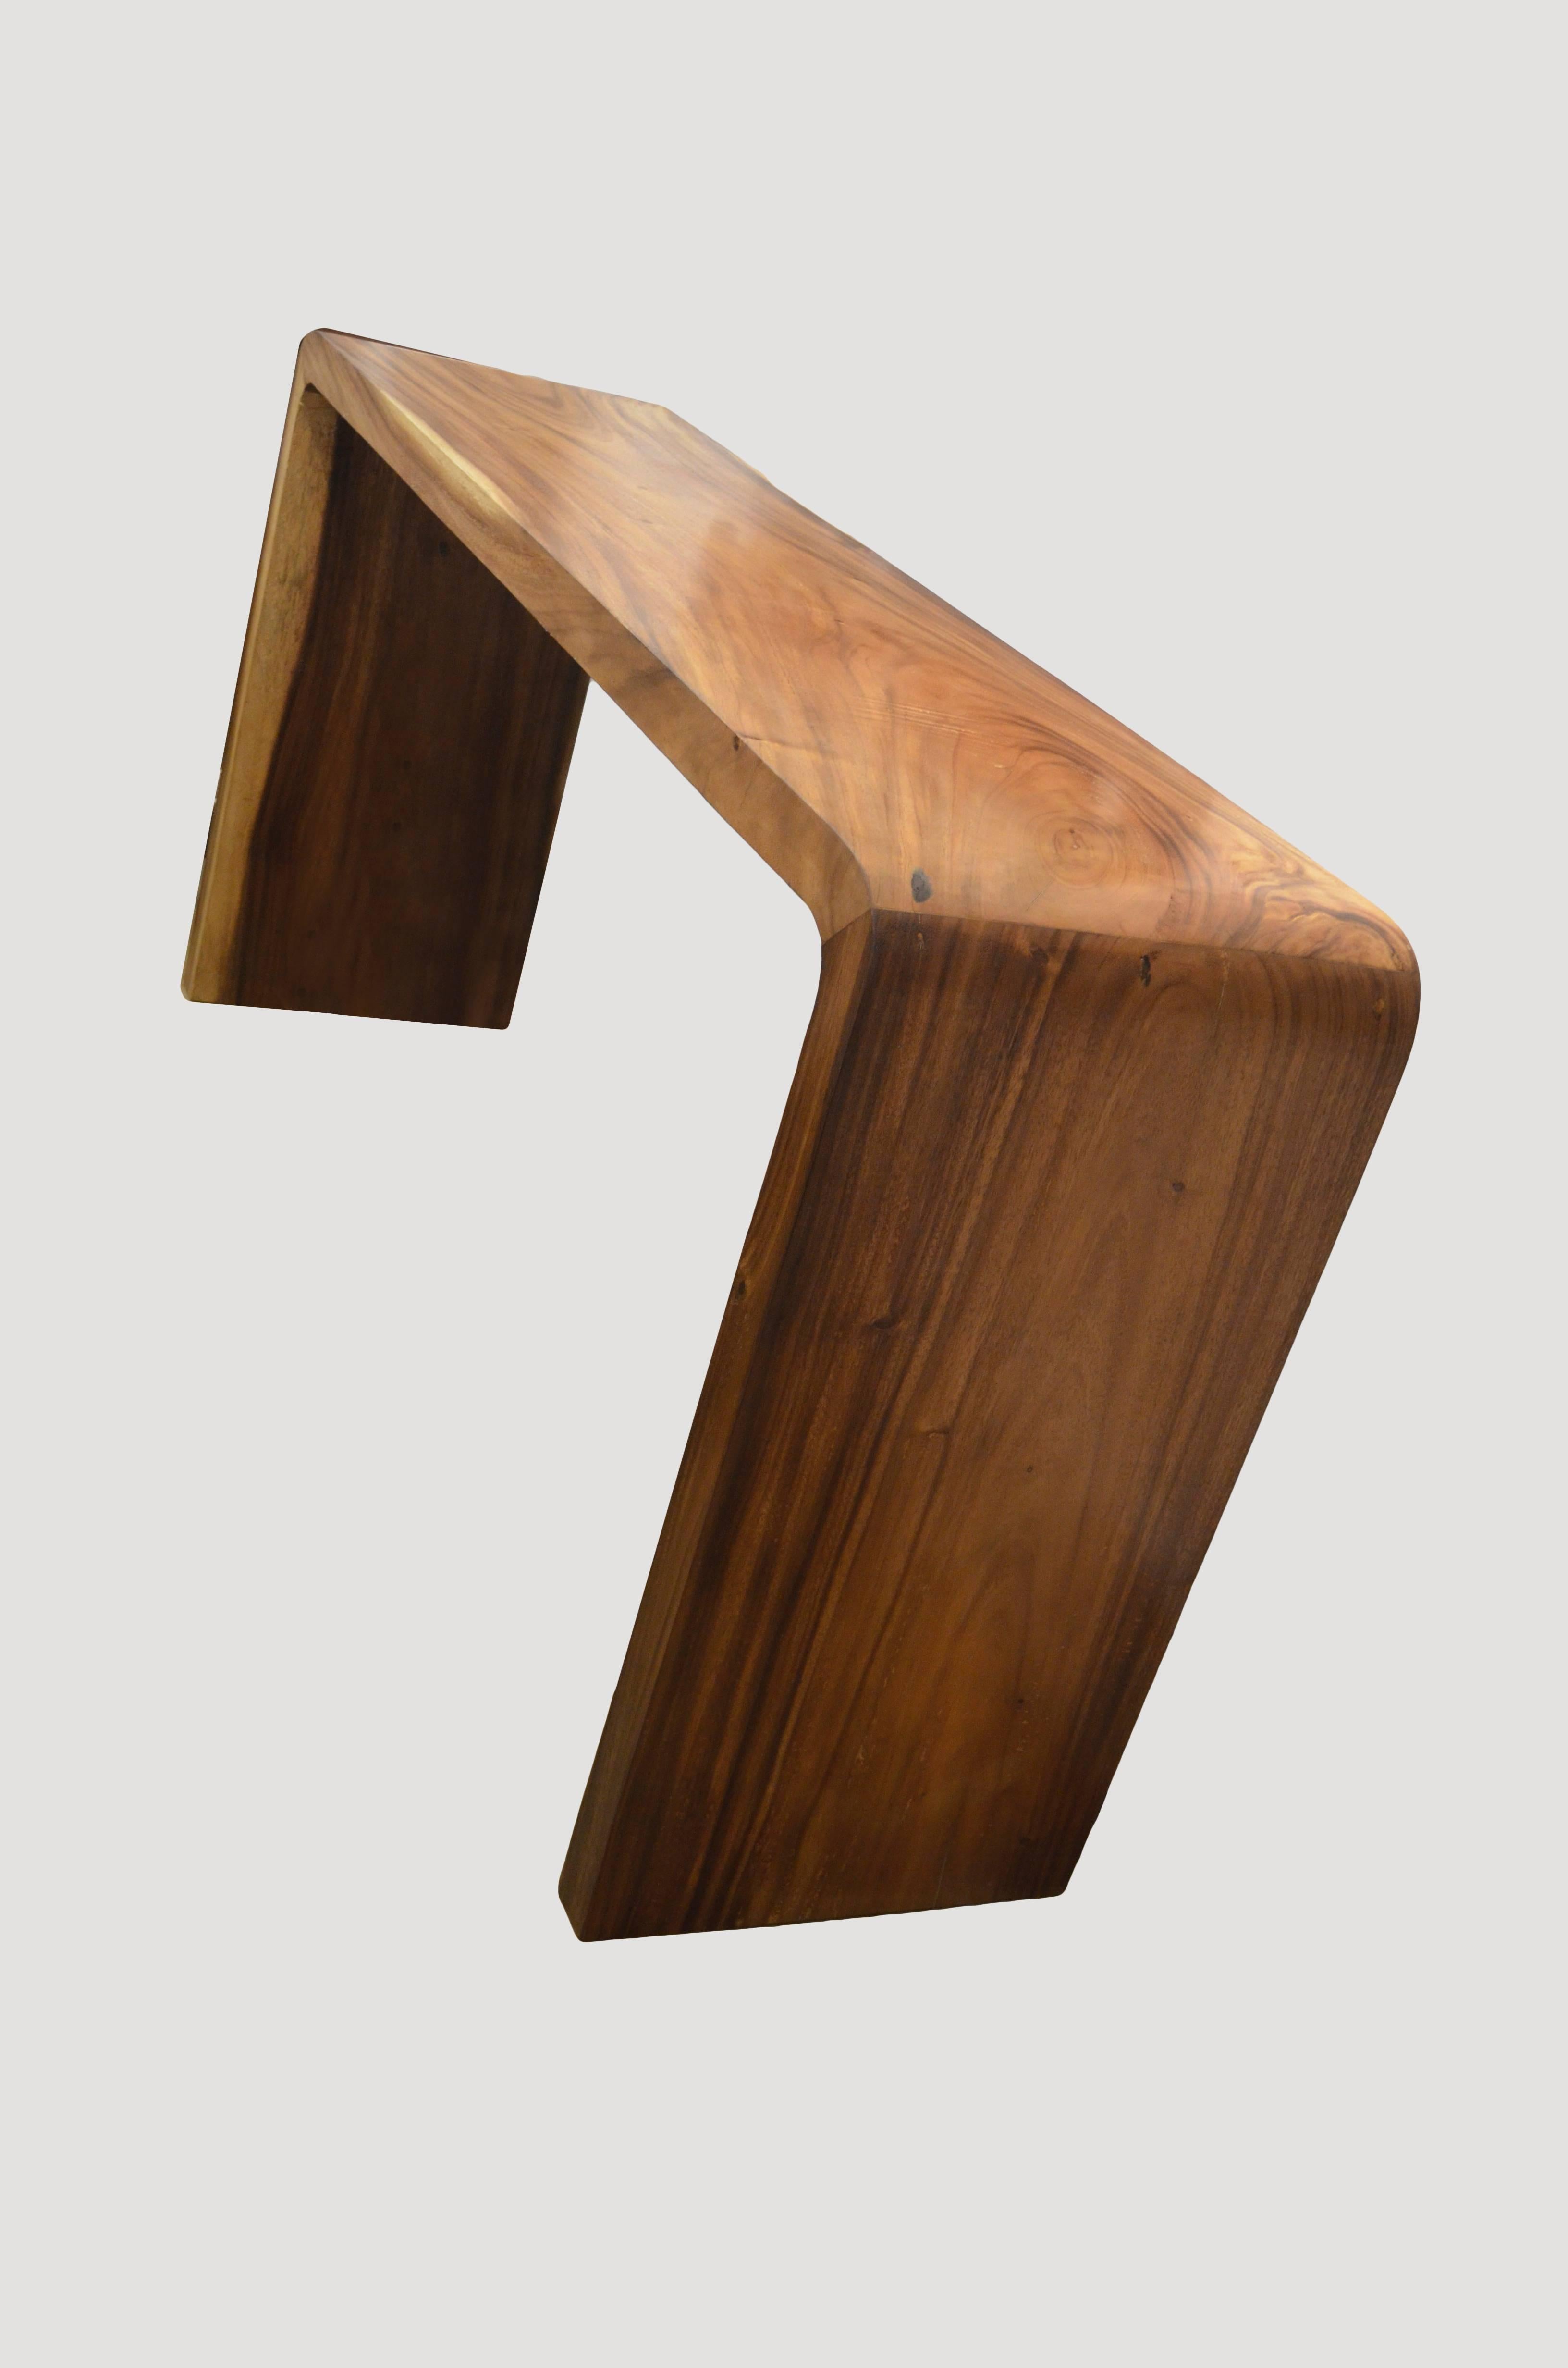 Minimalist console table made from reclaimed suar wood. Custom stains and sizes available.

Andrianna Shamaris. The Leader In Modern Organic Design™